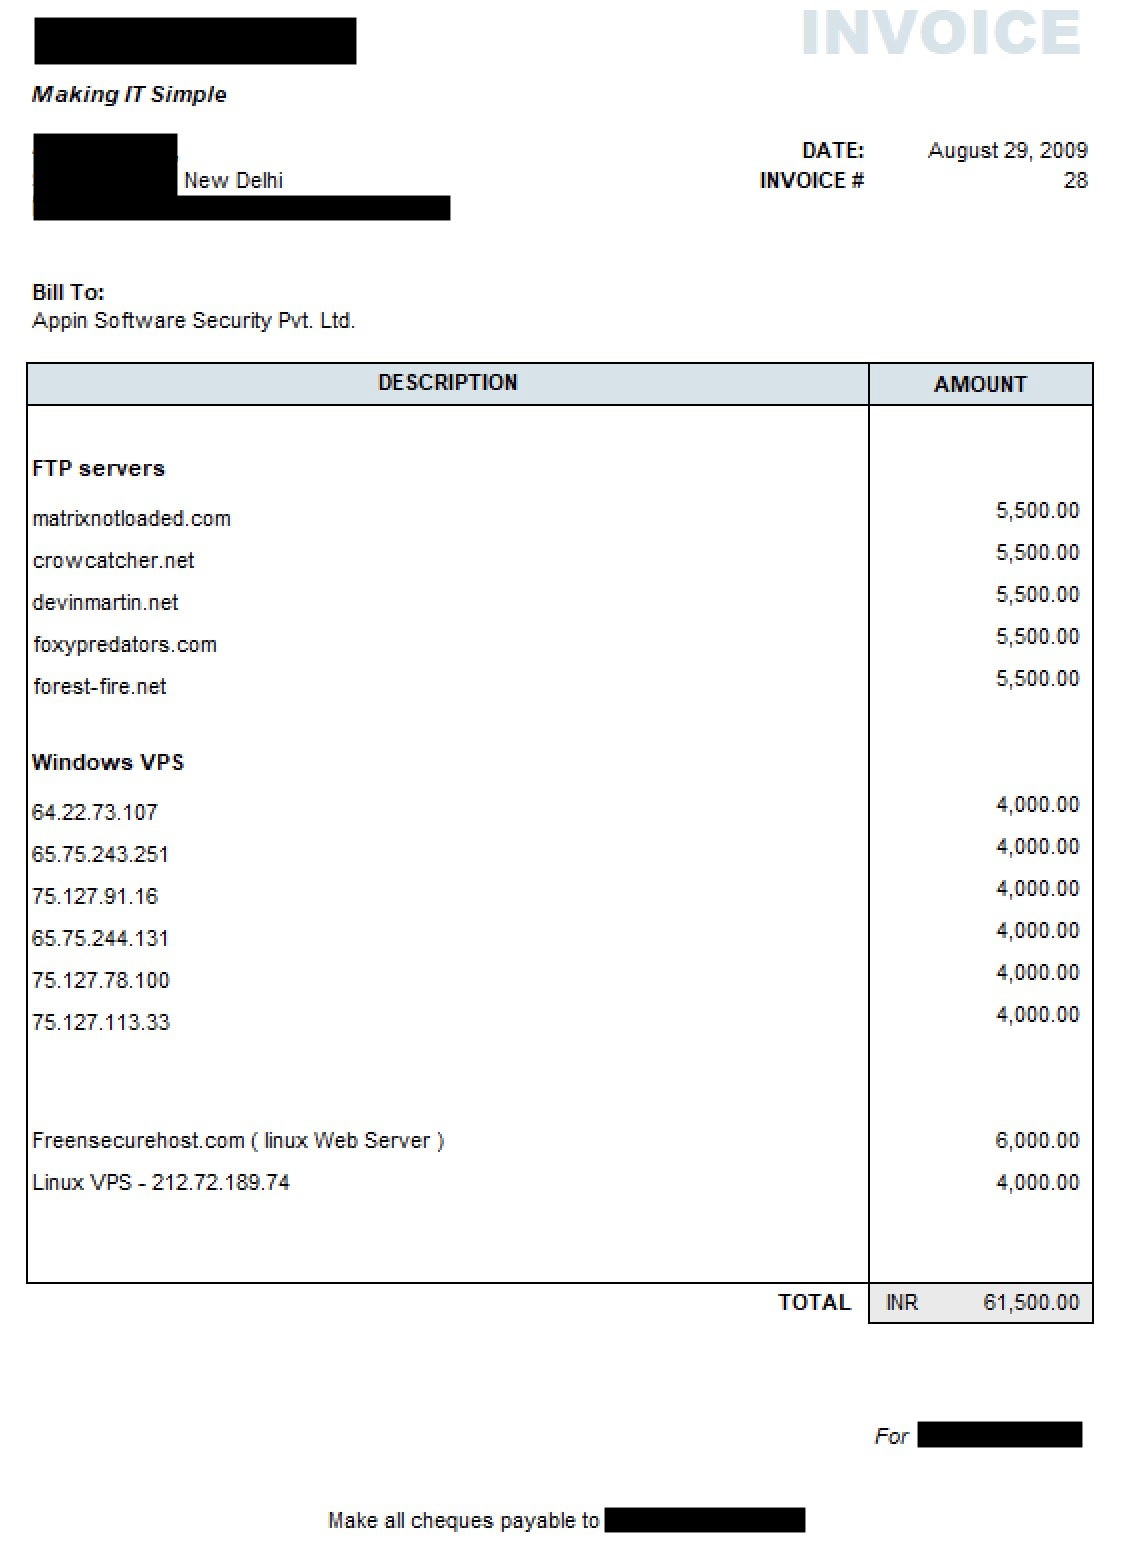 Invoice to Appin for Malicious FTP Domains and VPS Servers